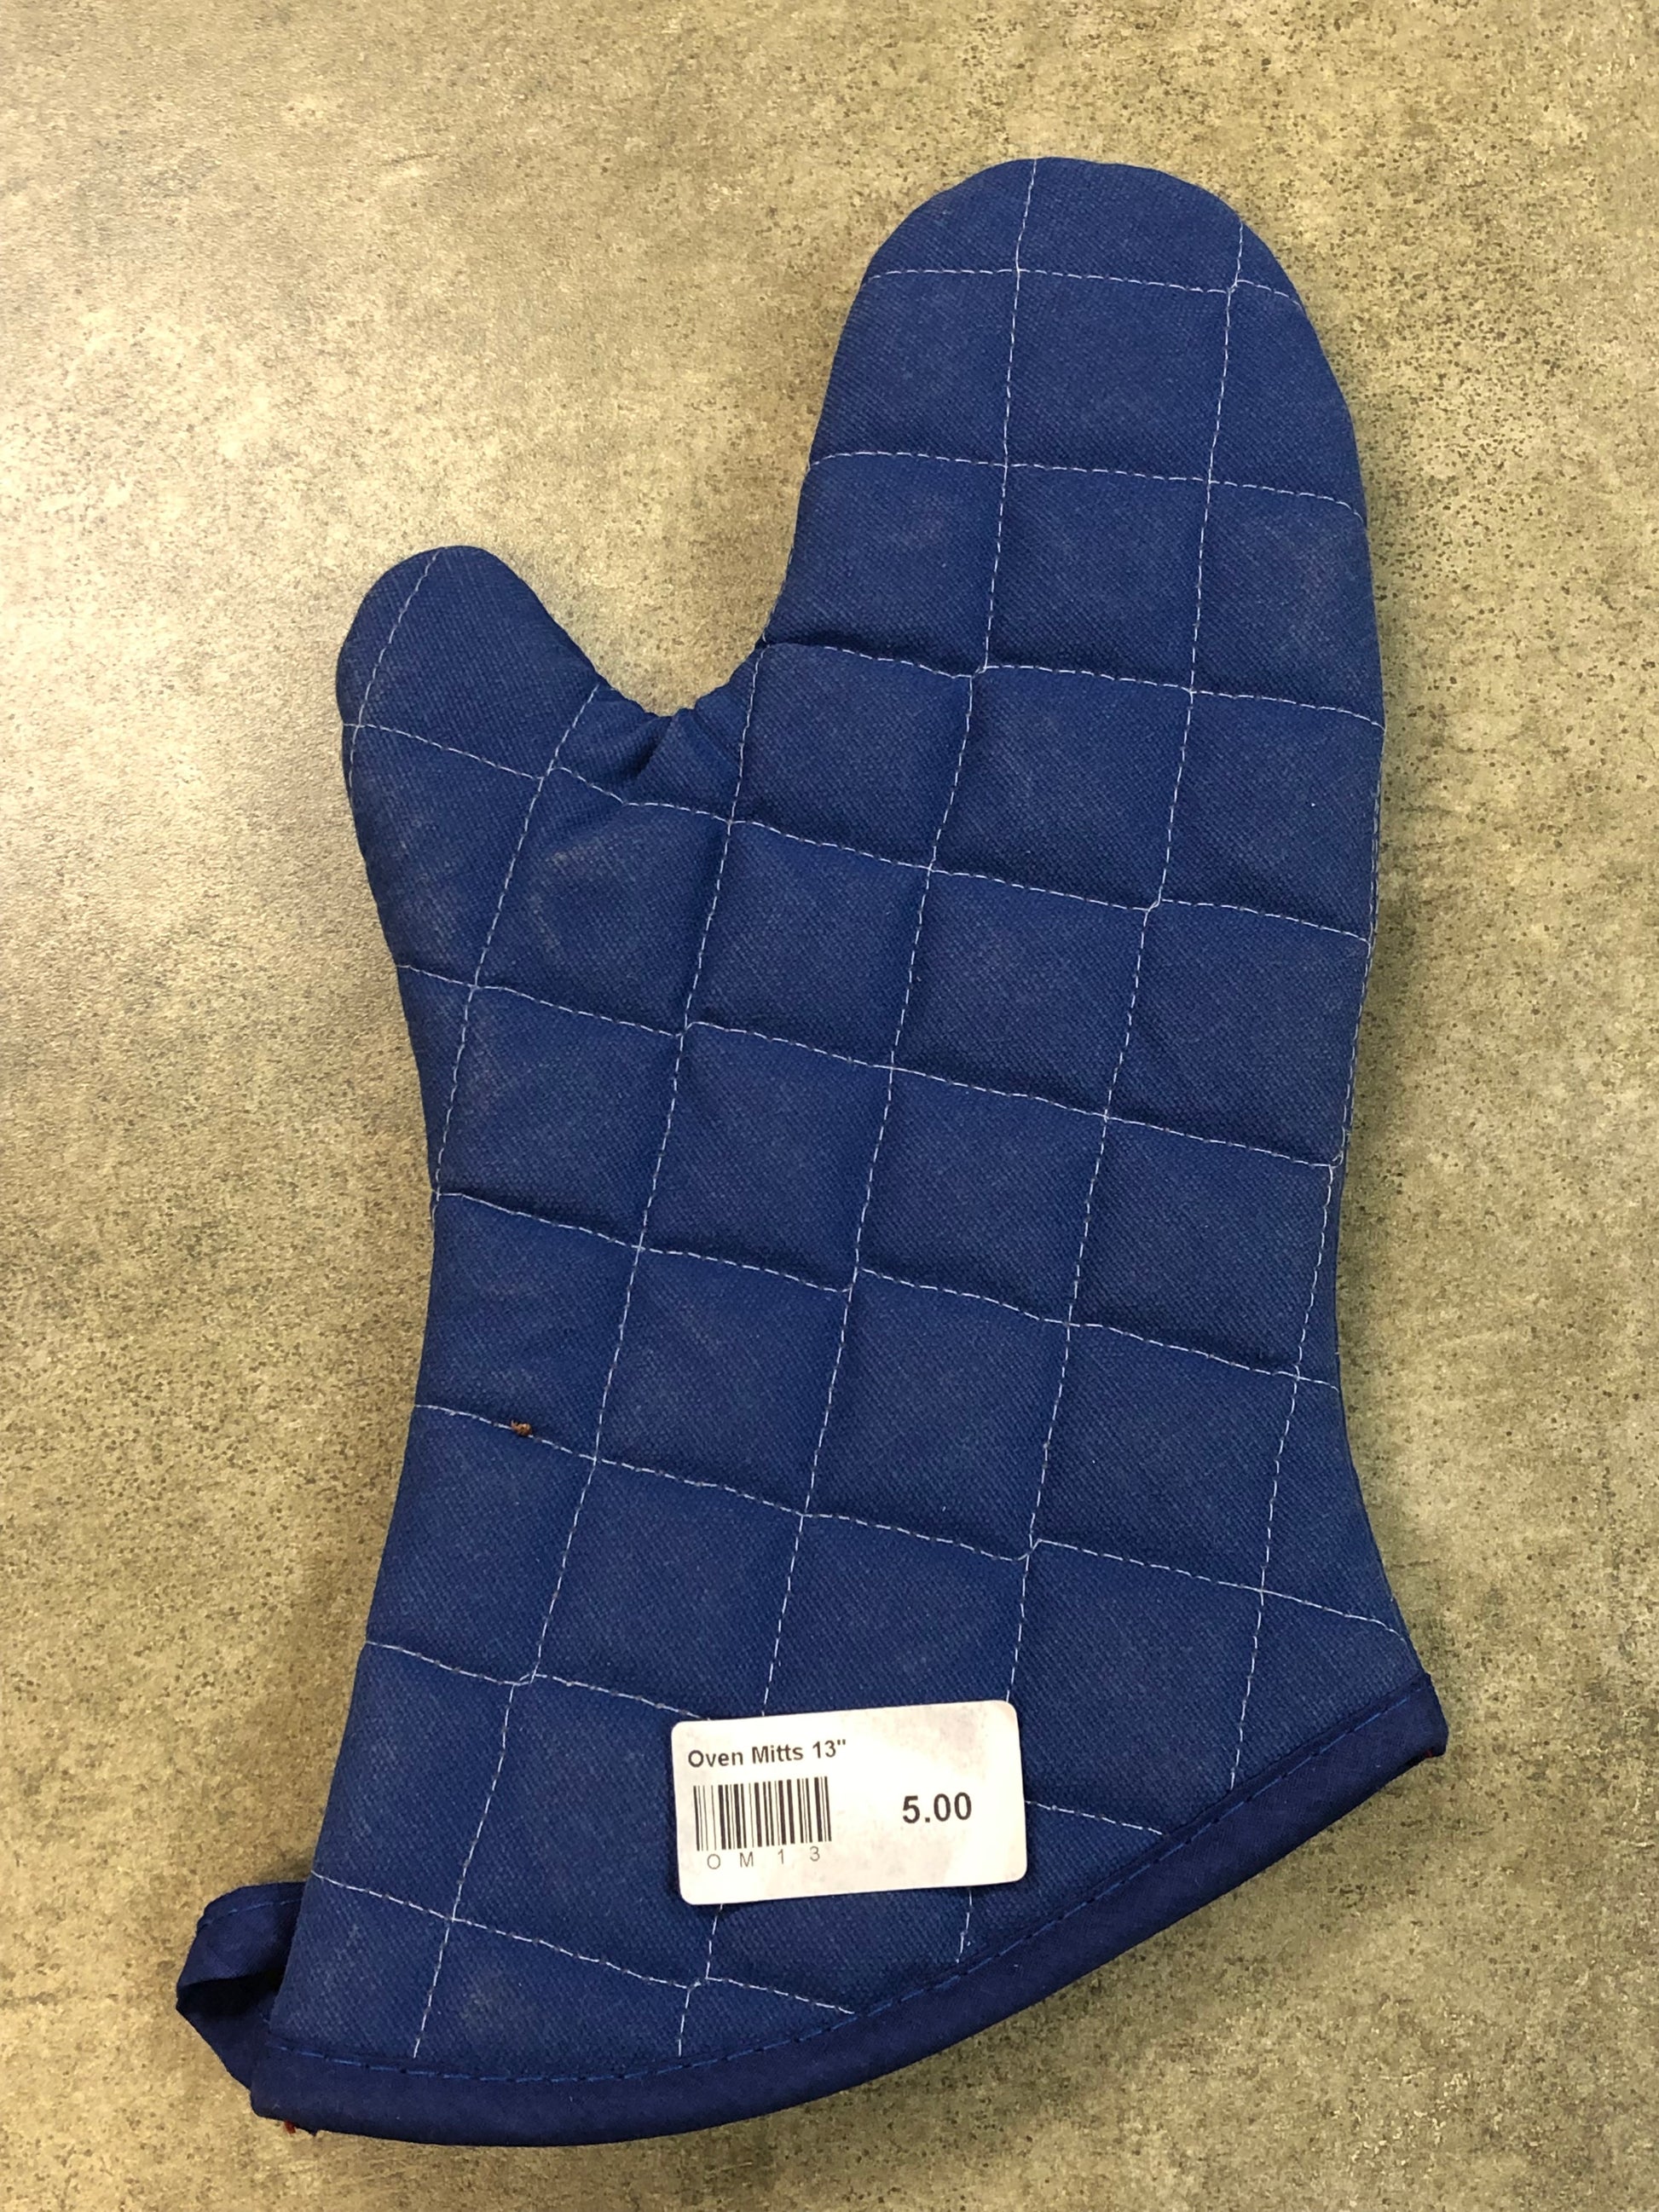 A blue oven mitt with white stitching. Looks kind of like Michigan